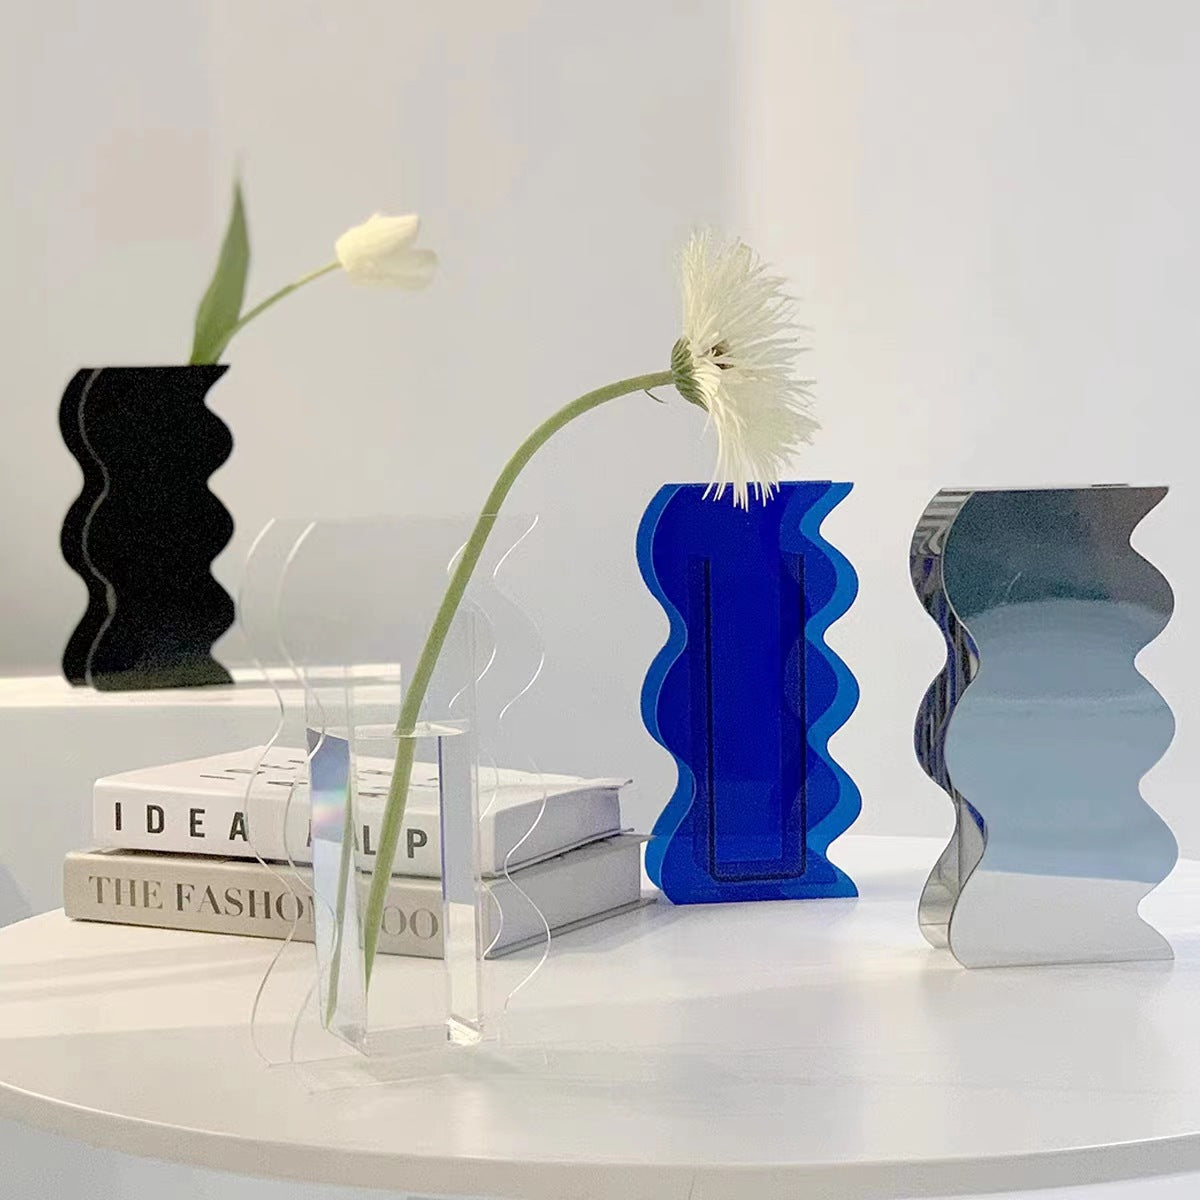 Bulk 1 Pc Wave Shaped Vases Geometric Acrylic Vase For Home Office Wedding Valentine's Day Table Centerpieces Wholesale